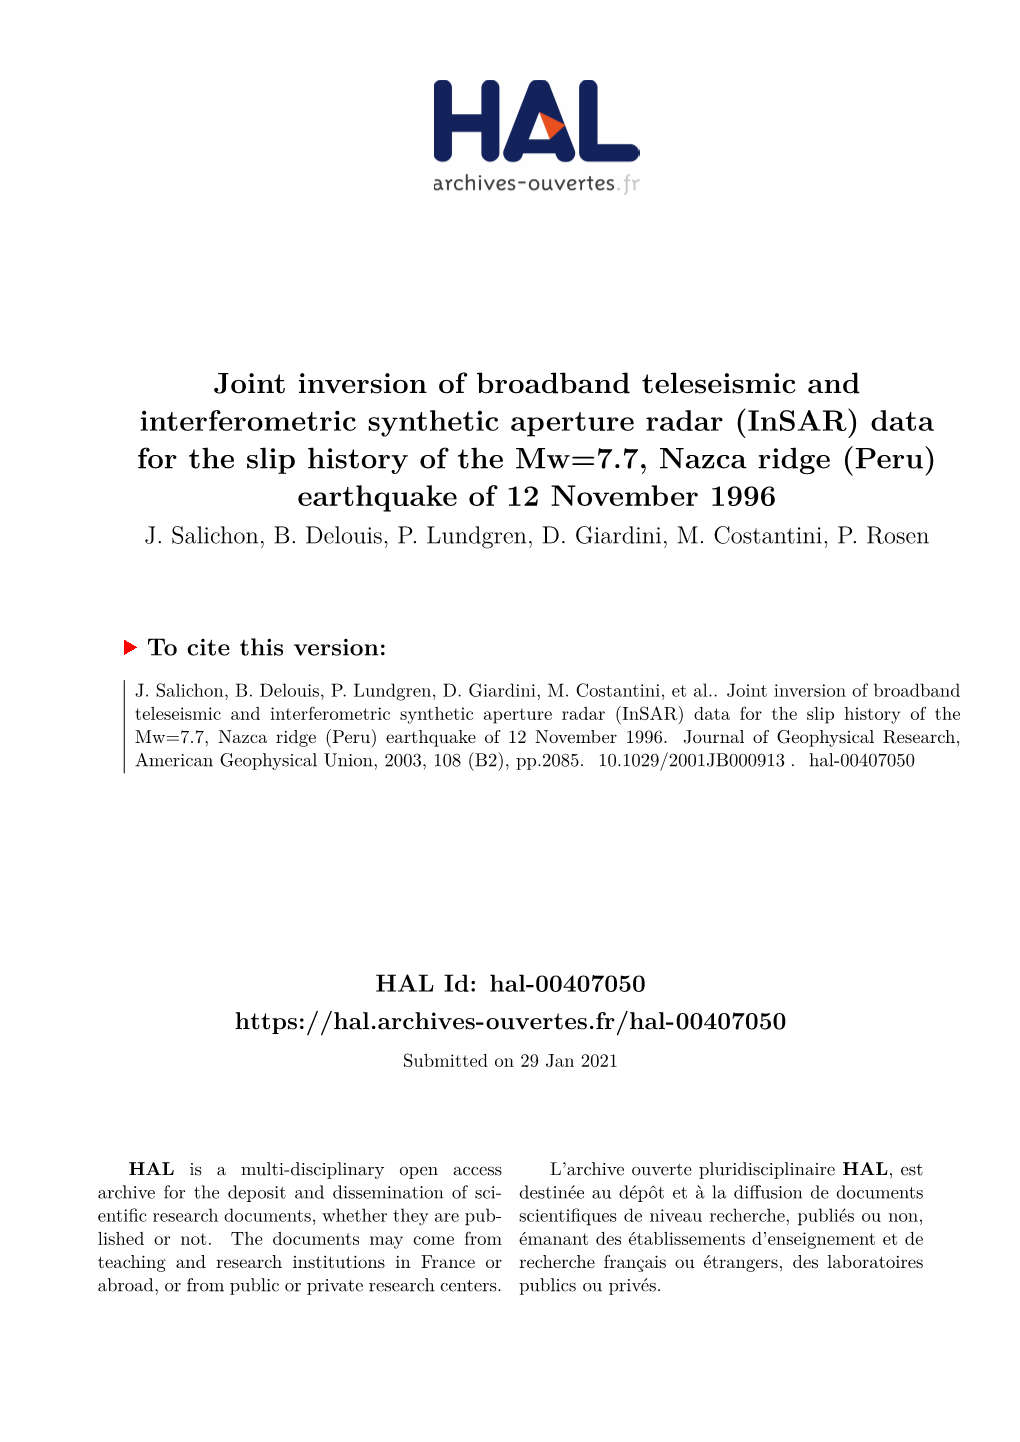 Joint Inversion of Broadband Teleseismic and Interferometric Synthetic Aperture Radar (Insar) Data for the Slip History of the M